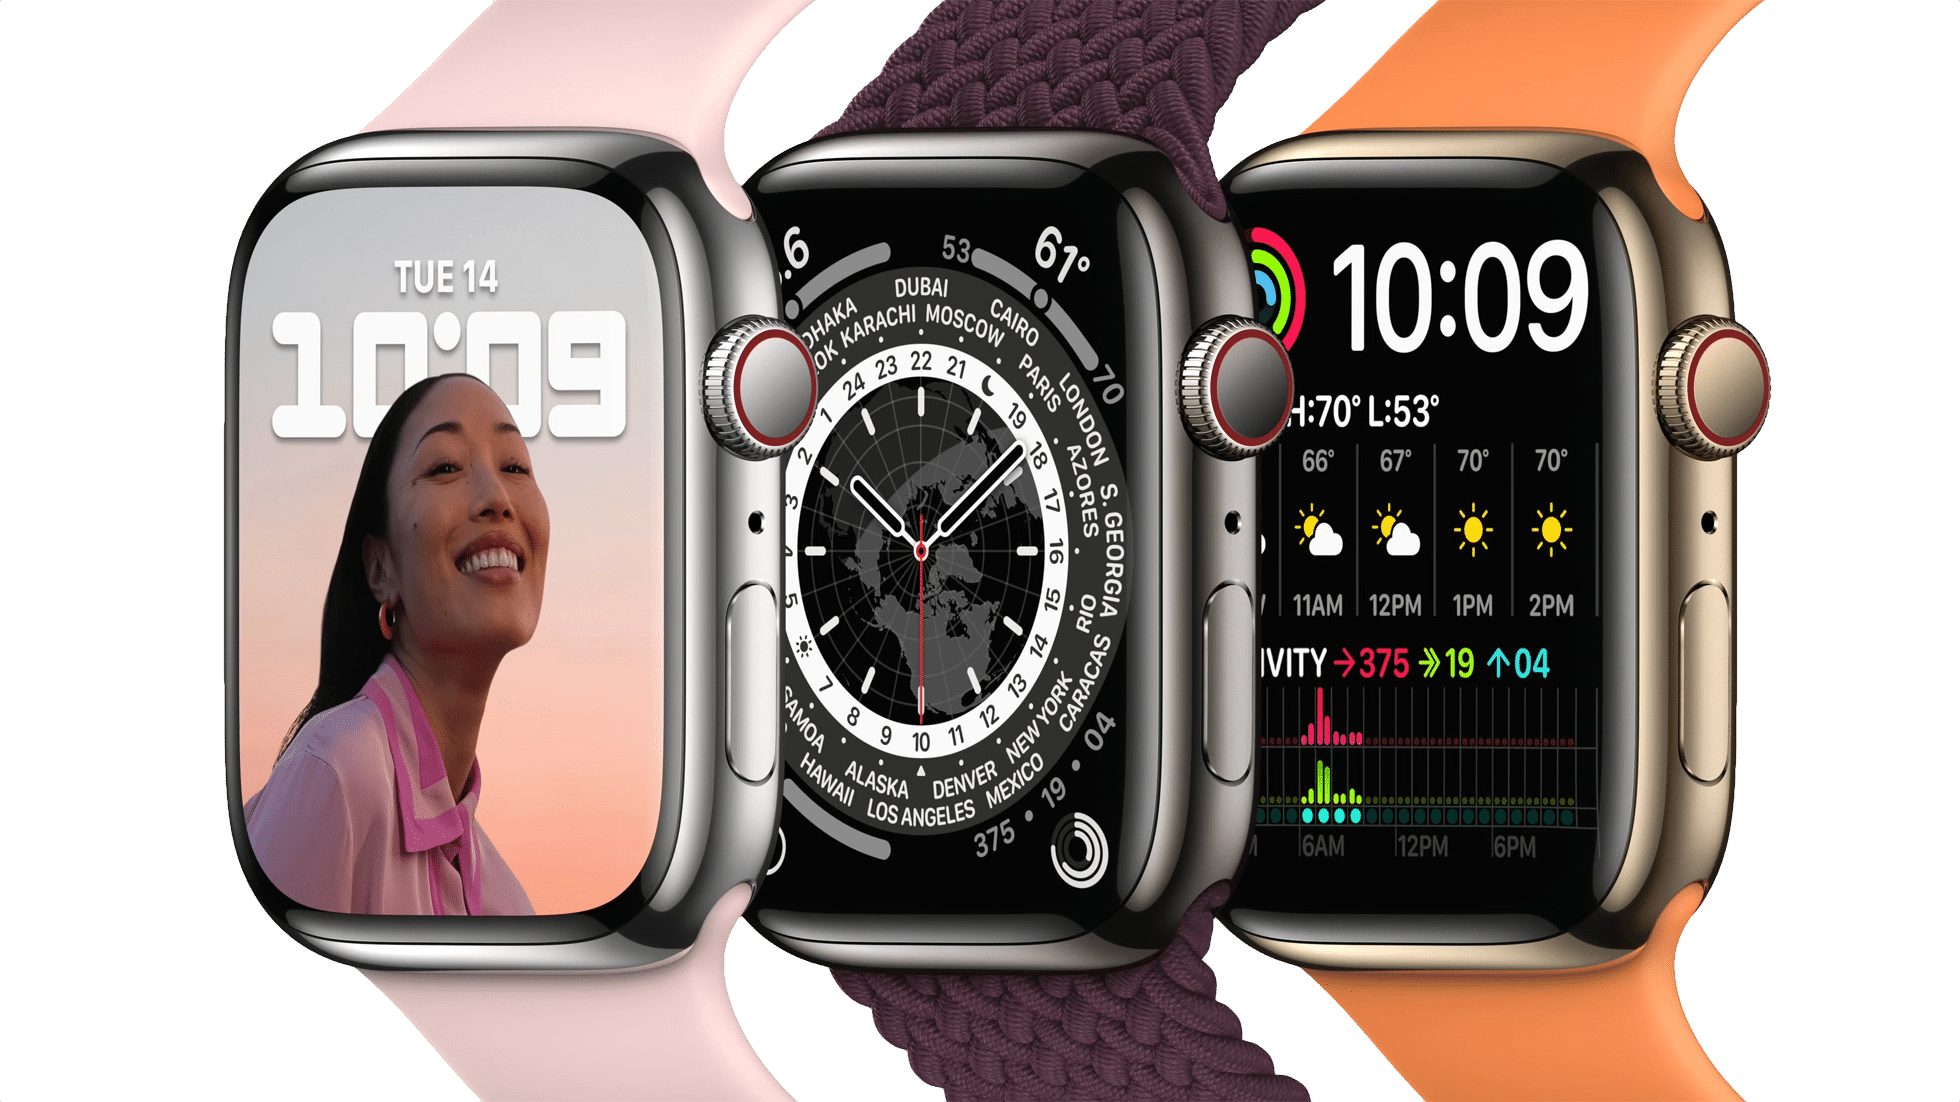 What happens if you don't activate cellular on Apple Watch?